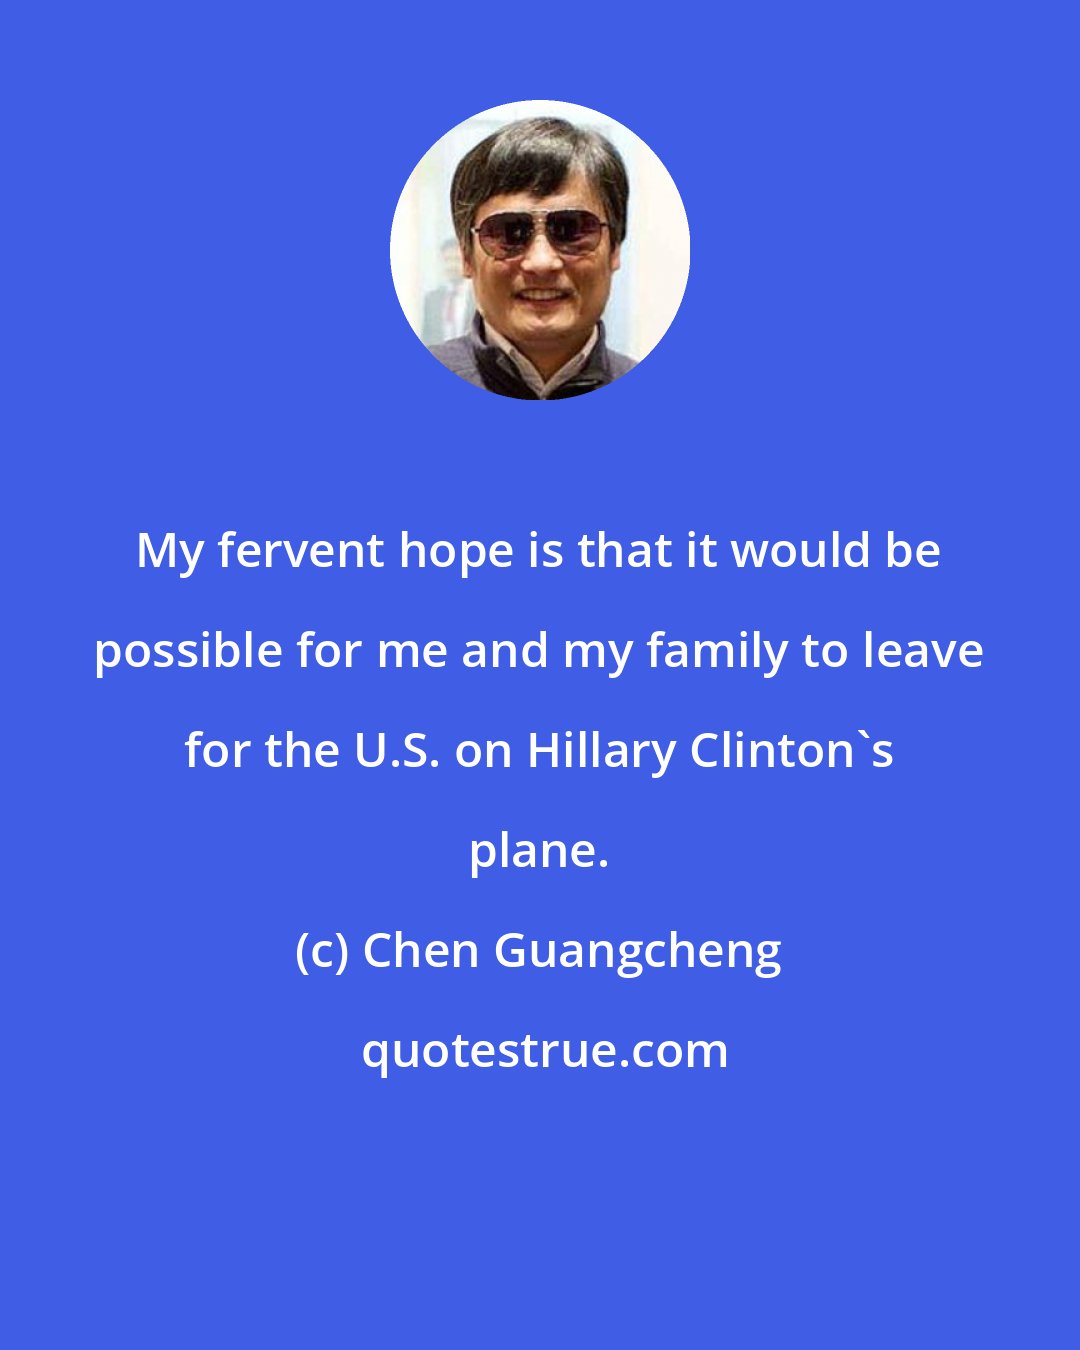 Chen Guangcheng: My fervent hope is that it would be possible for me and my family to leave for the U.S. on Hillary Clinton's plane.